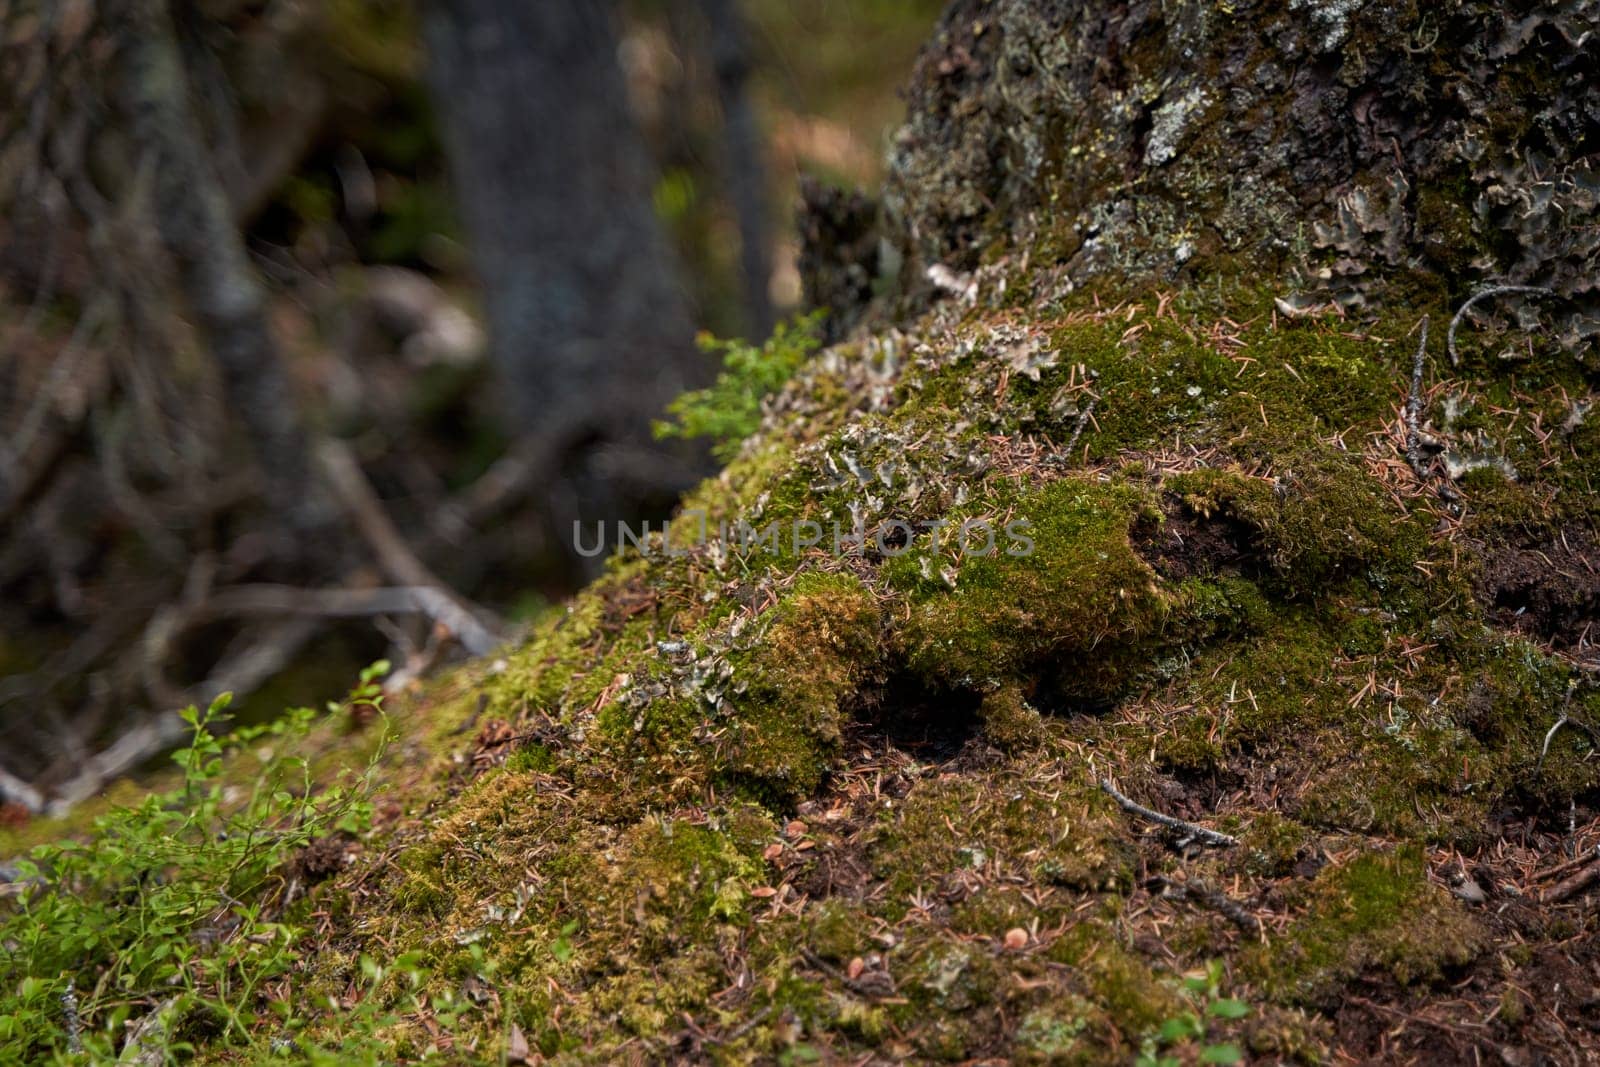 Close-up of details of moss growing on a rock in the mountains